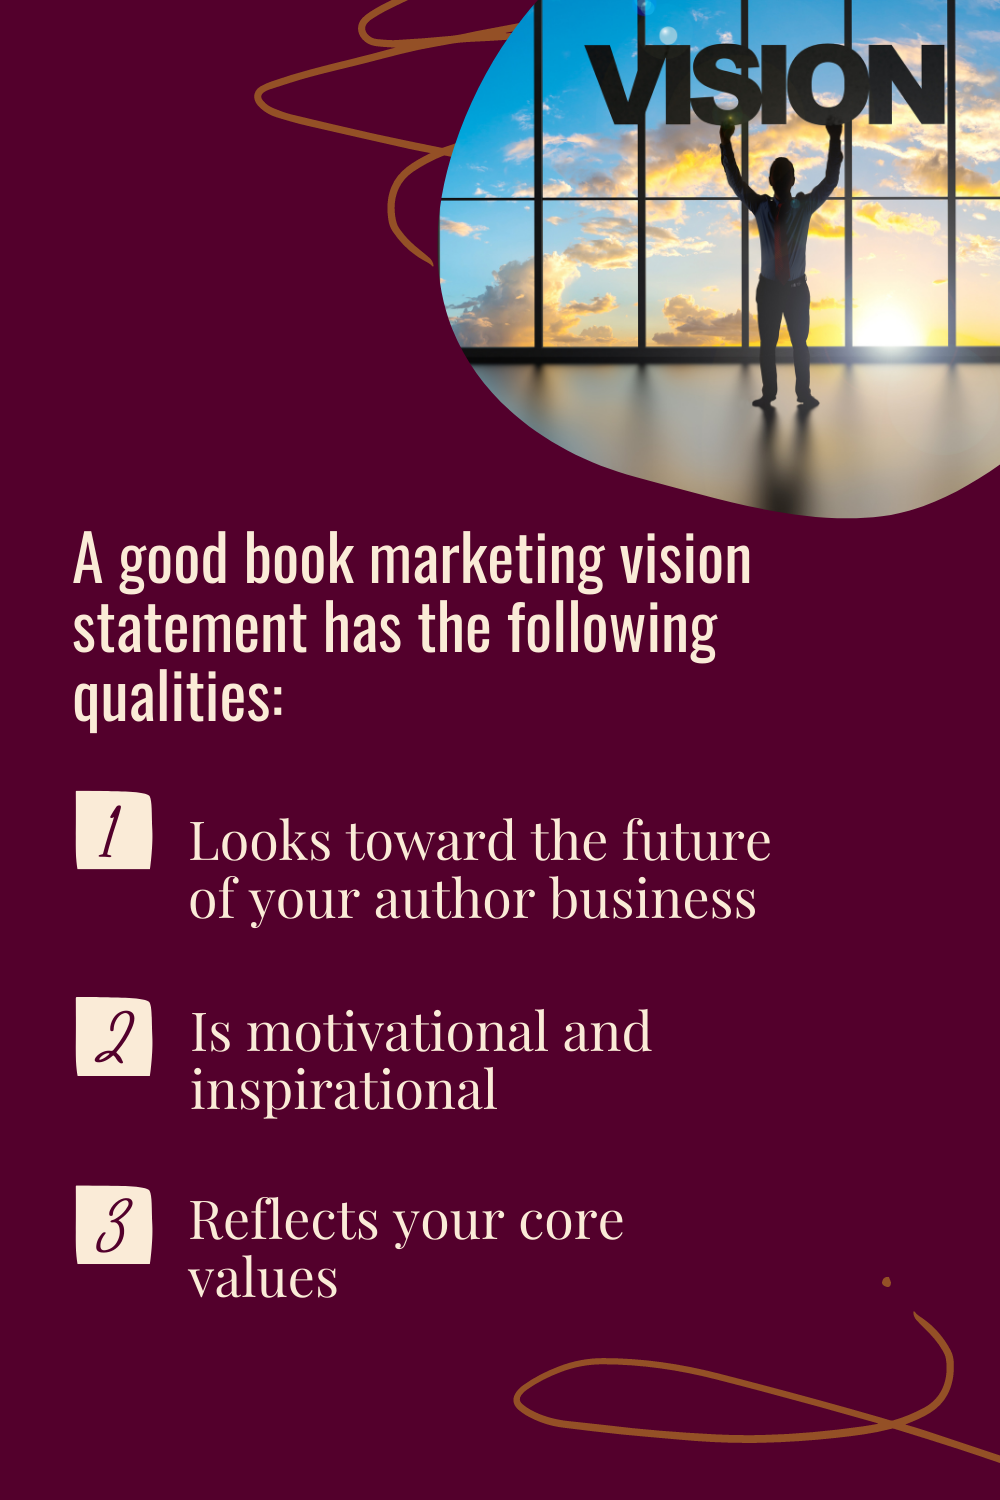 A good book marketing vision statement has the following qualities